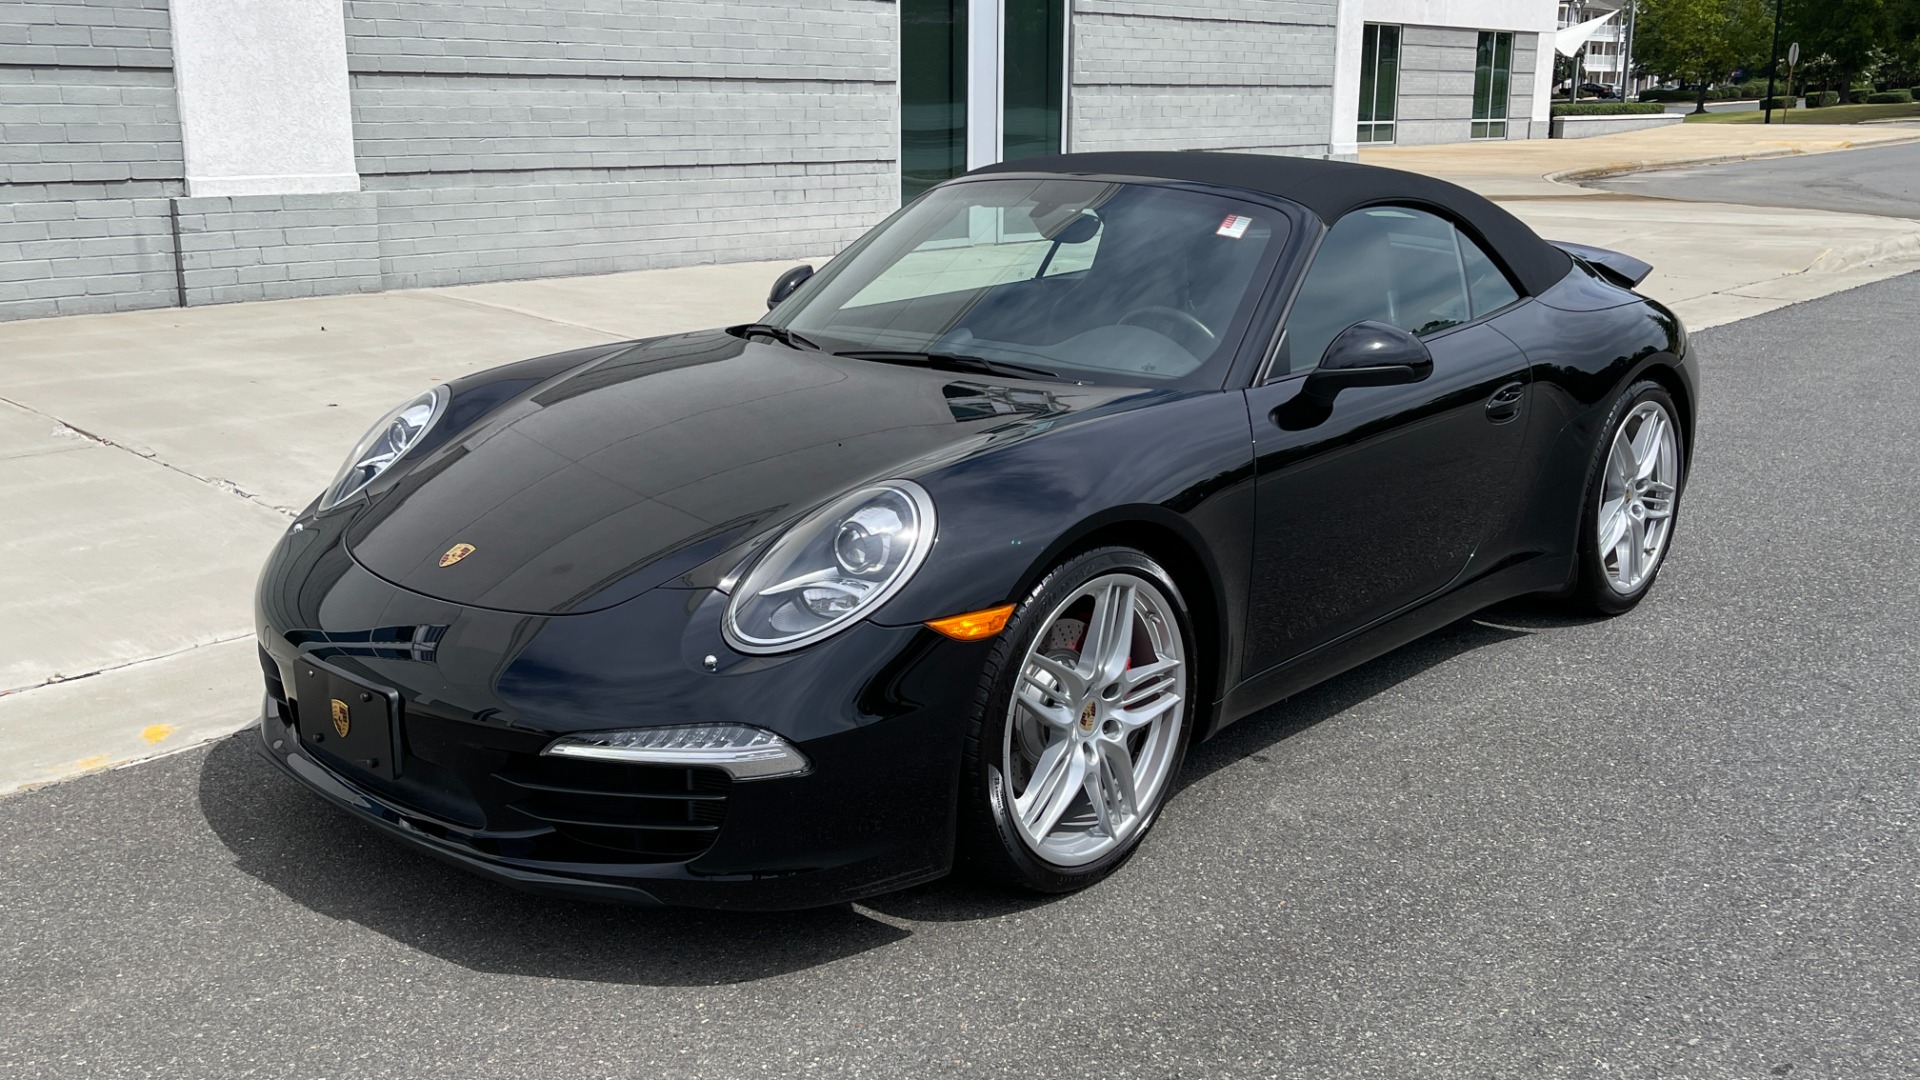 Used 2012 Porsche 911 991 Carrera S / CABRIOLET / PDK TRANSMISSION / SPORT CHRONO / PREMIUM for sale $80,250 at Formula Imports in Charlotte NC 28227 2